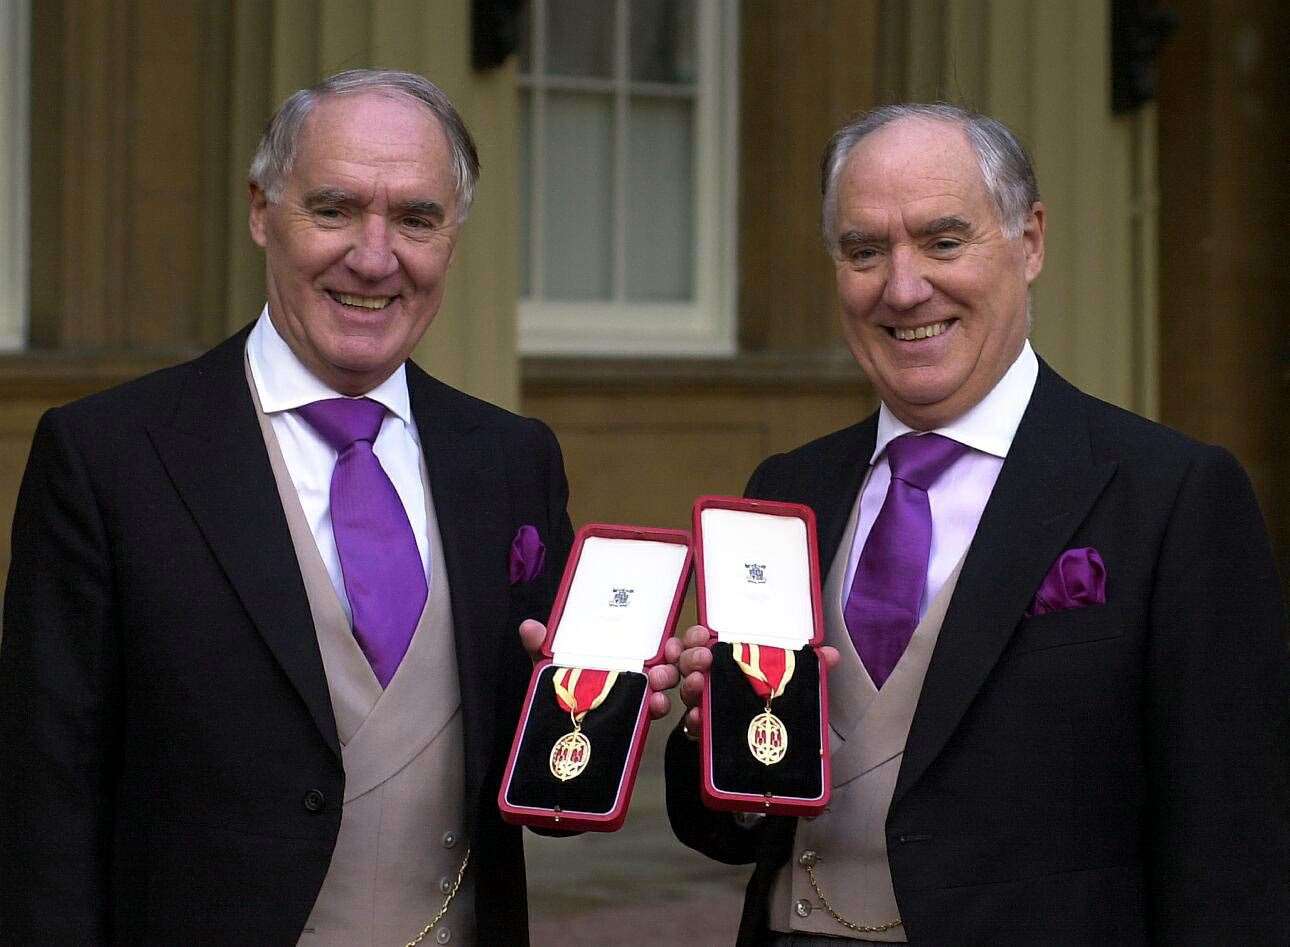 Sir Frederick Barclay, right, and his twin brother, Sir David, after receiving their knighthoods in 2000 (Michael Stephens/PA)